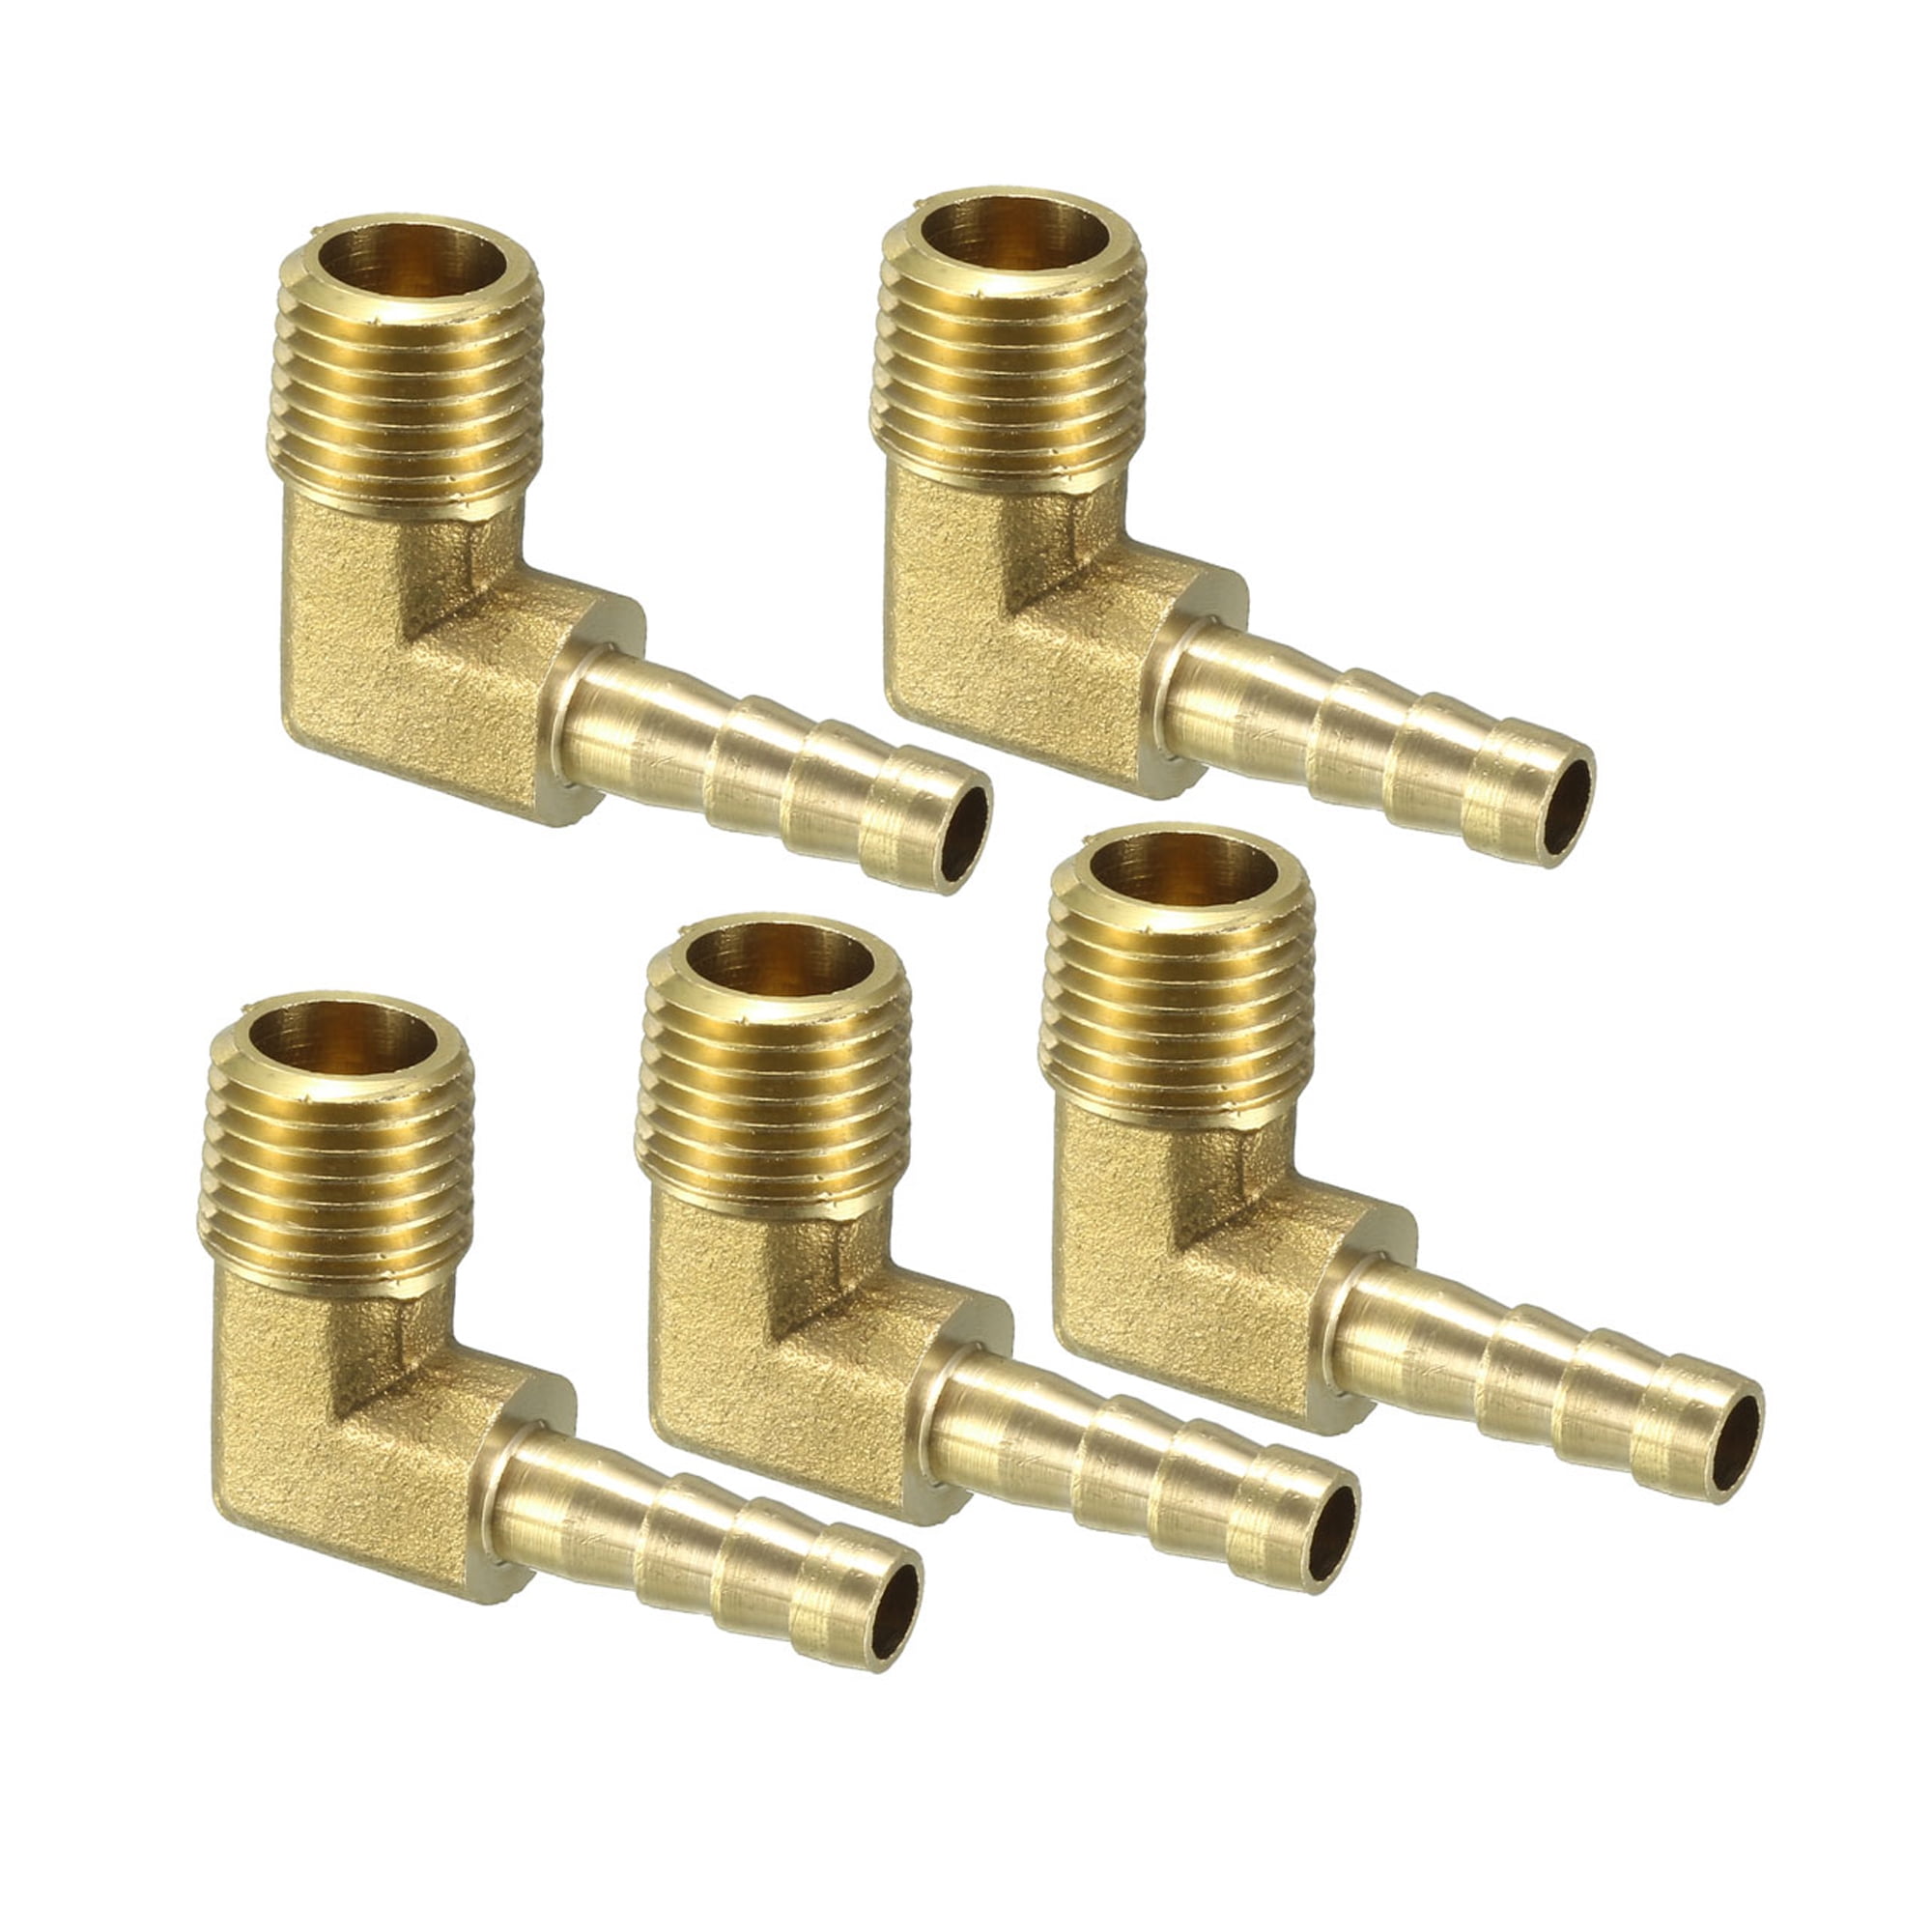 3/8 x 3/8 Hose ID Brass Hex Barbed Splicer Mender Joint Adapter Union Fitting Quickun Hose Bard Fitting